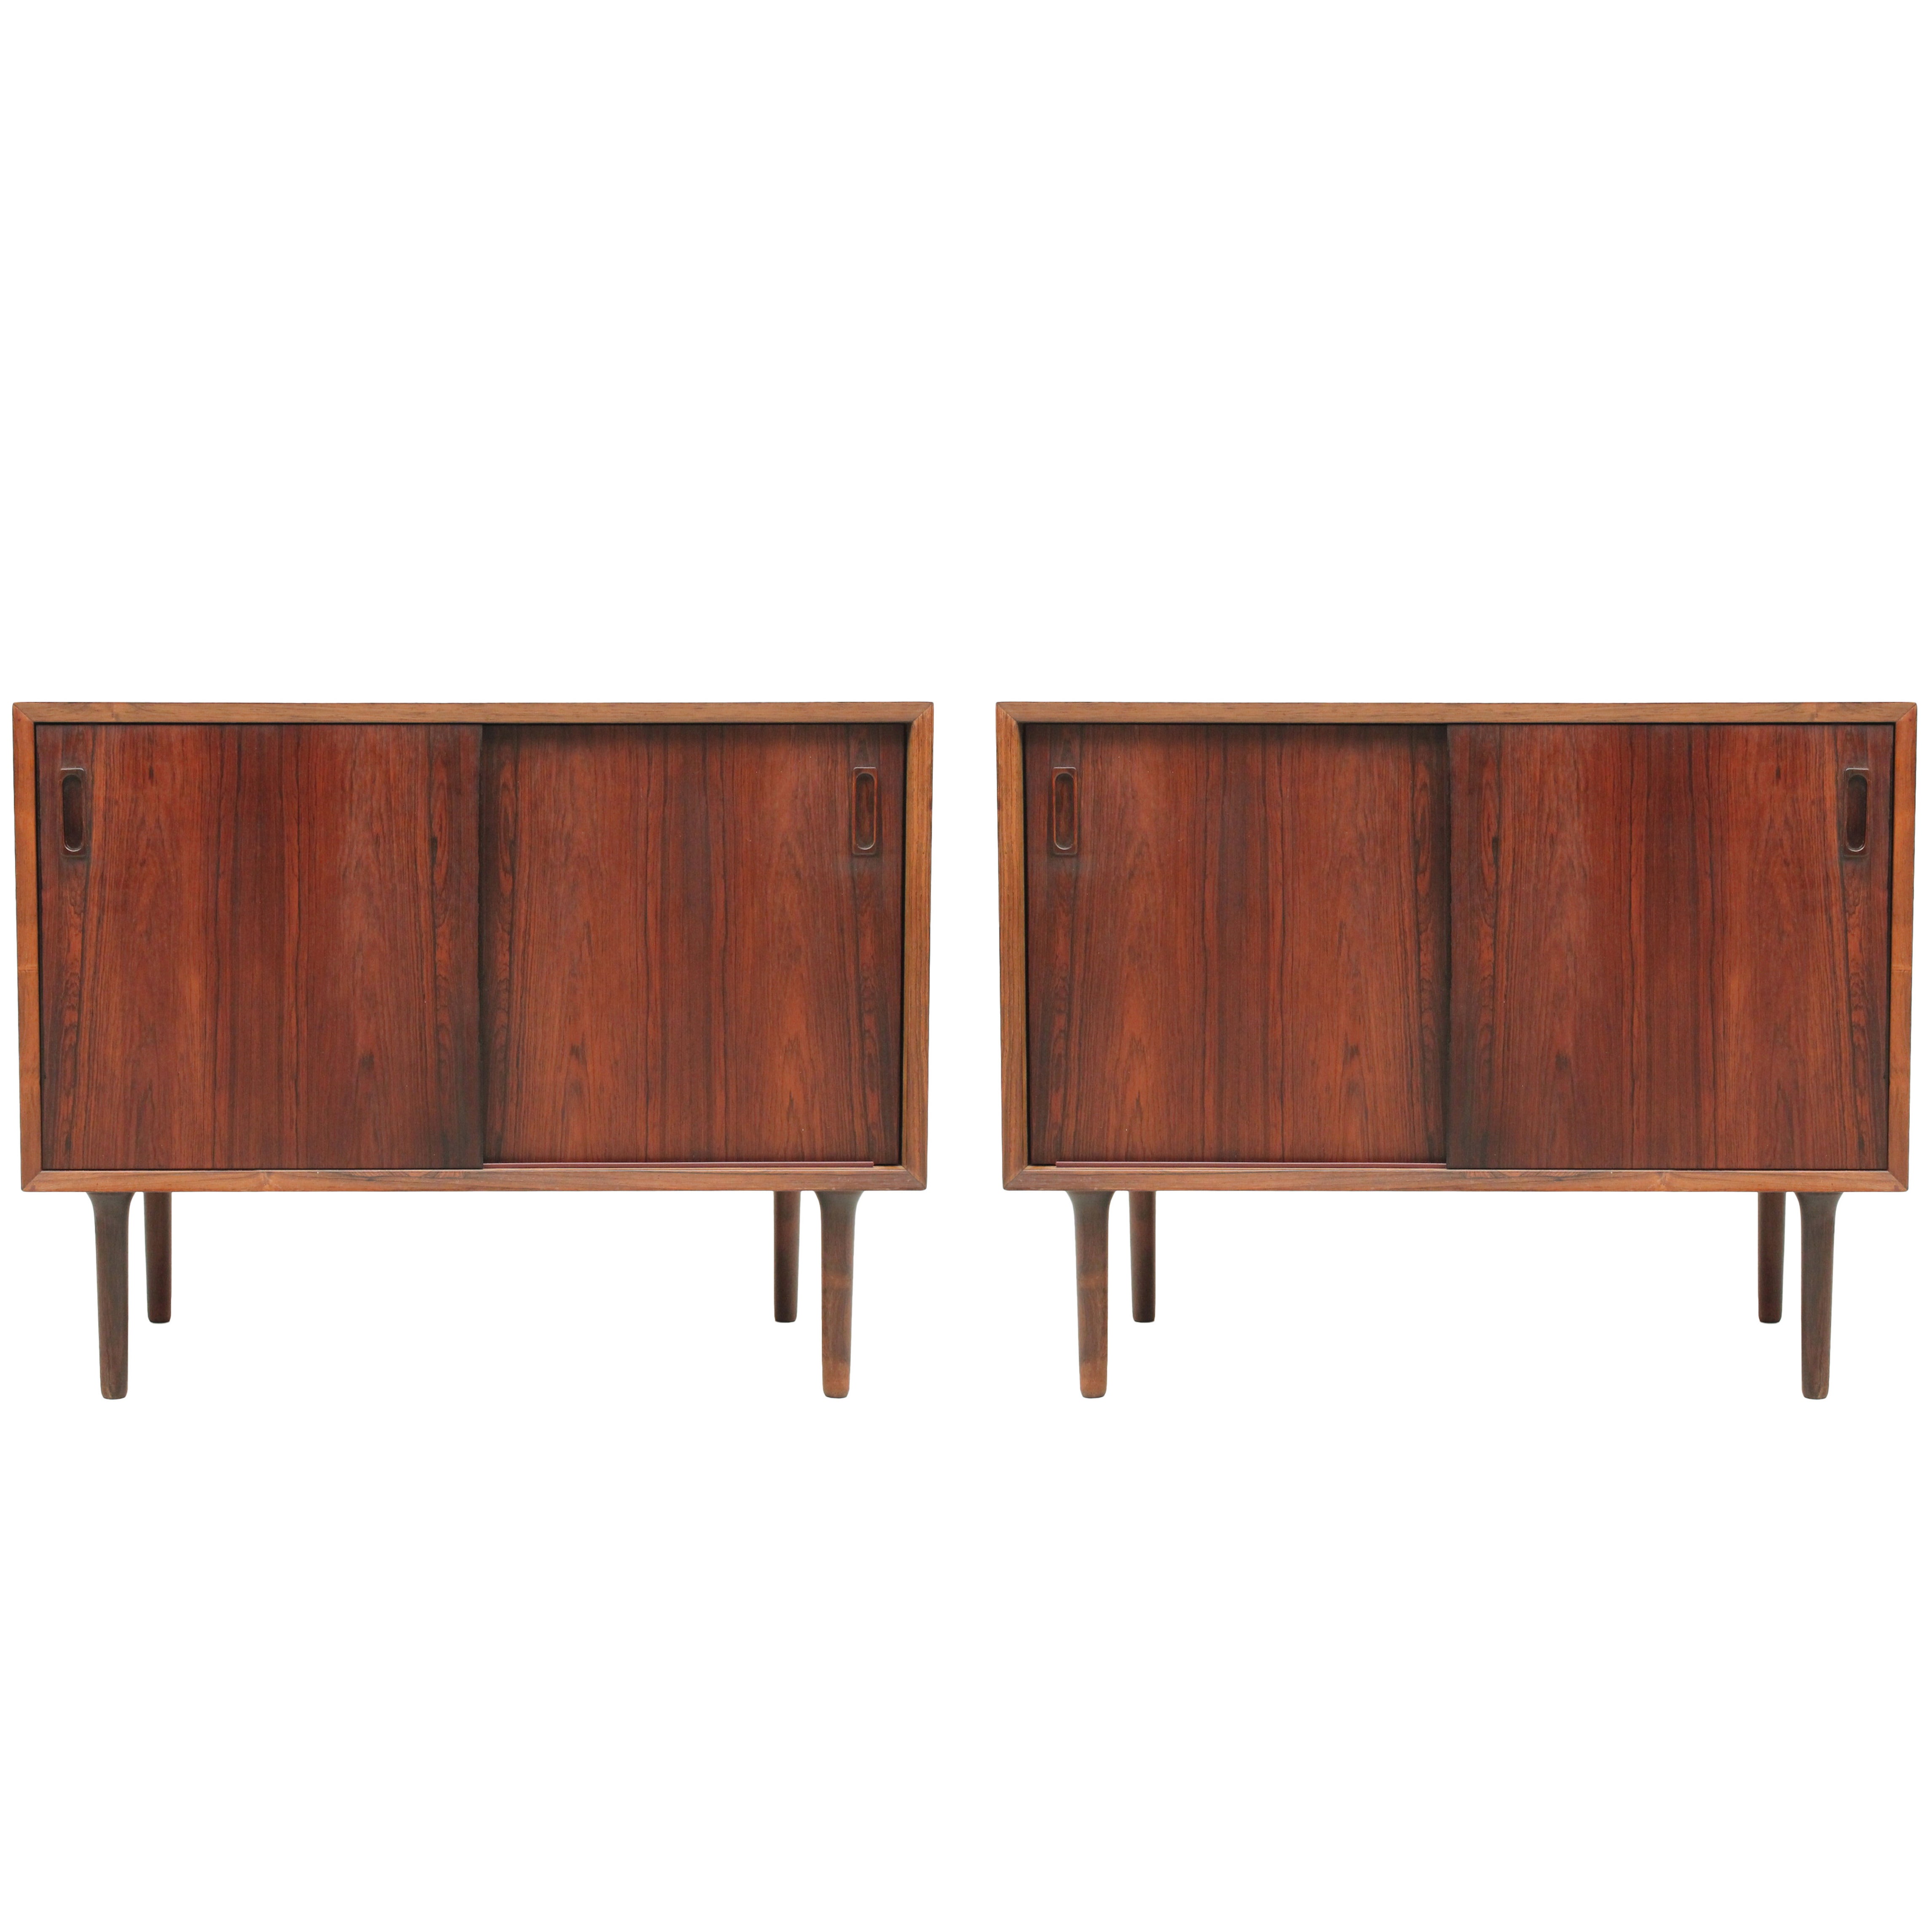 Pair of Danish, Mid-Century Modern Rosewood Cabinet by Lyby Møbler